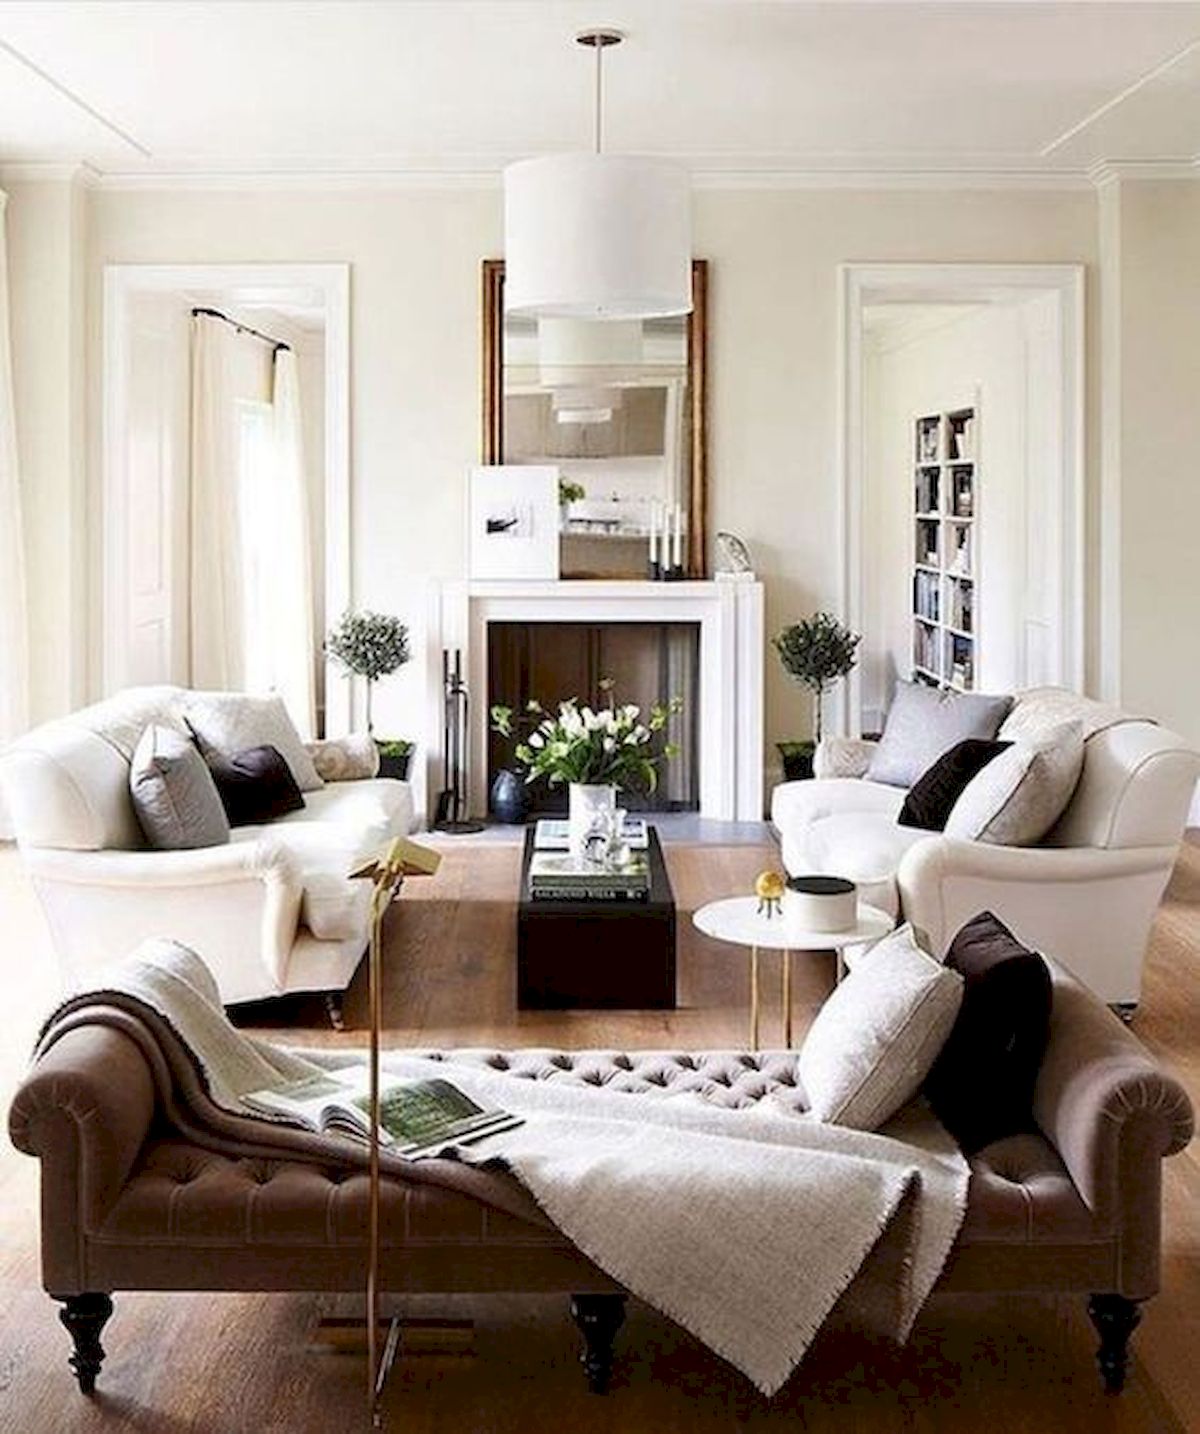 36 Elegant Living Room Design and Decor Ideas That You Will Love (15)